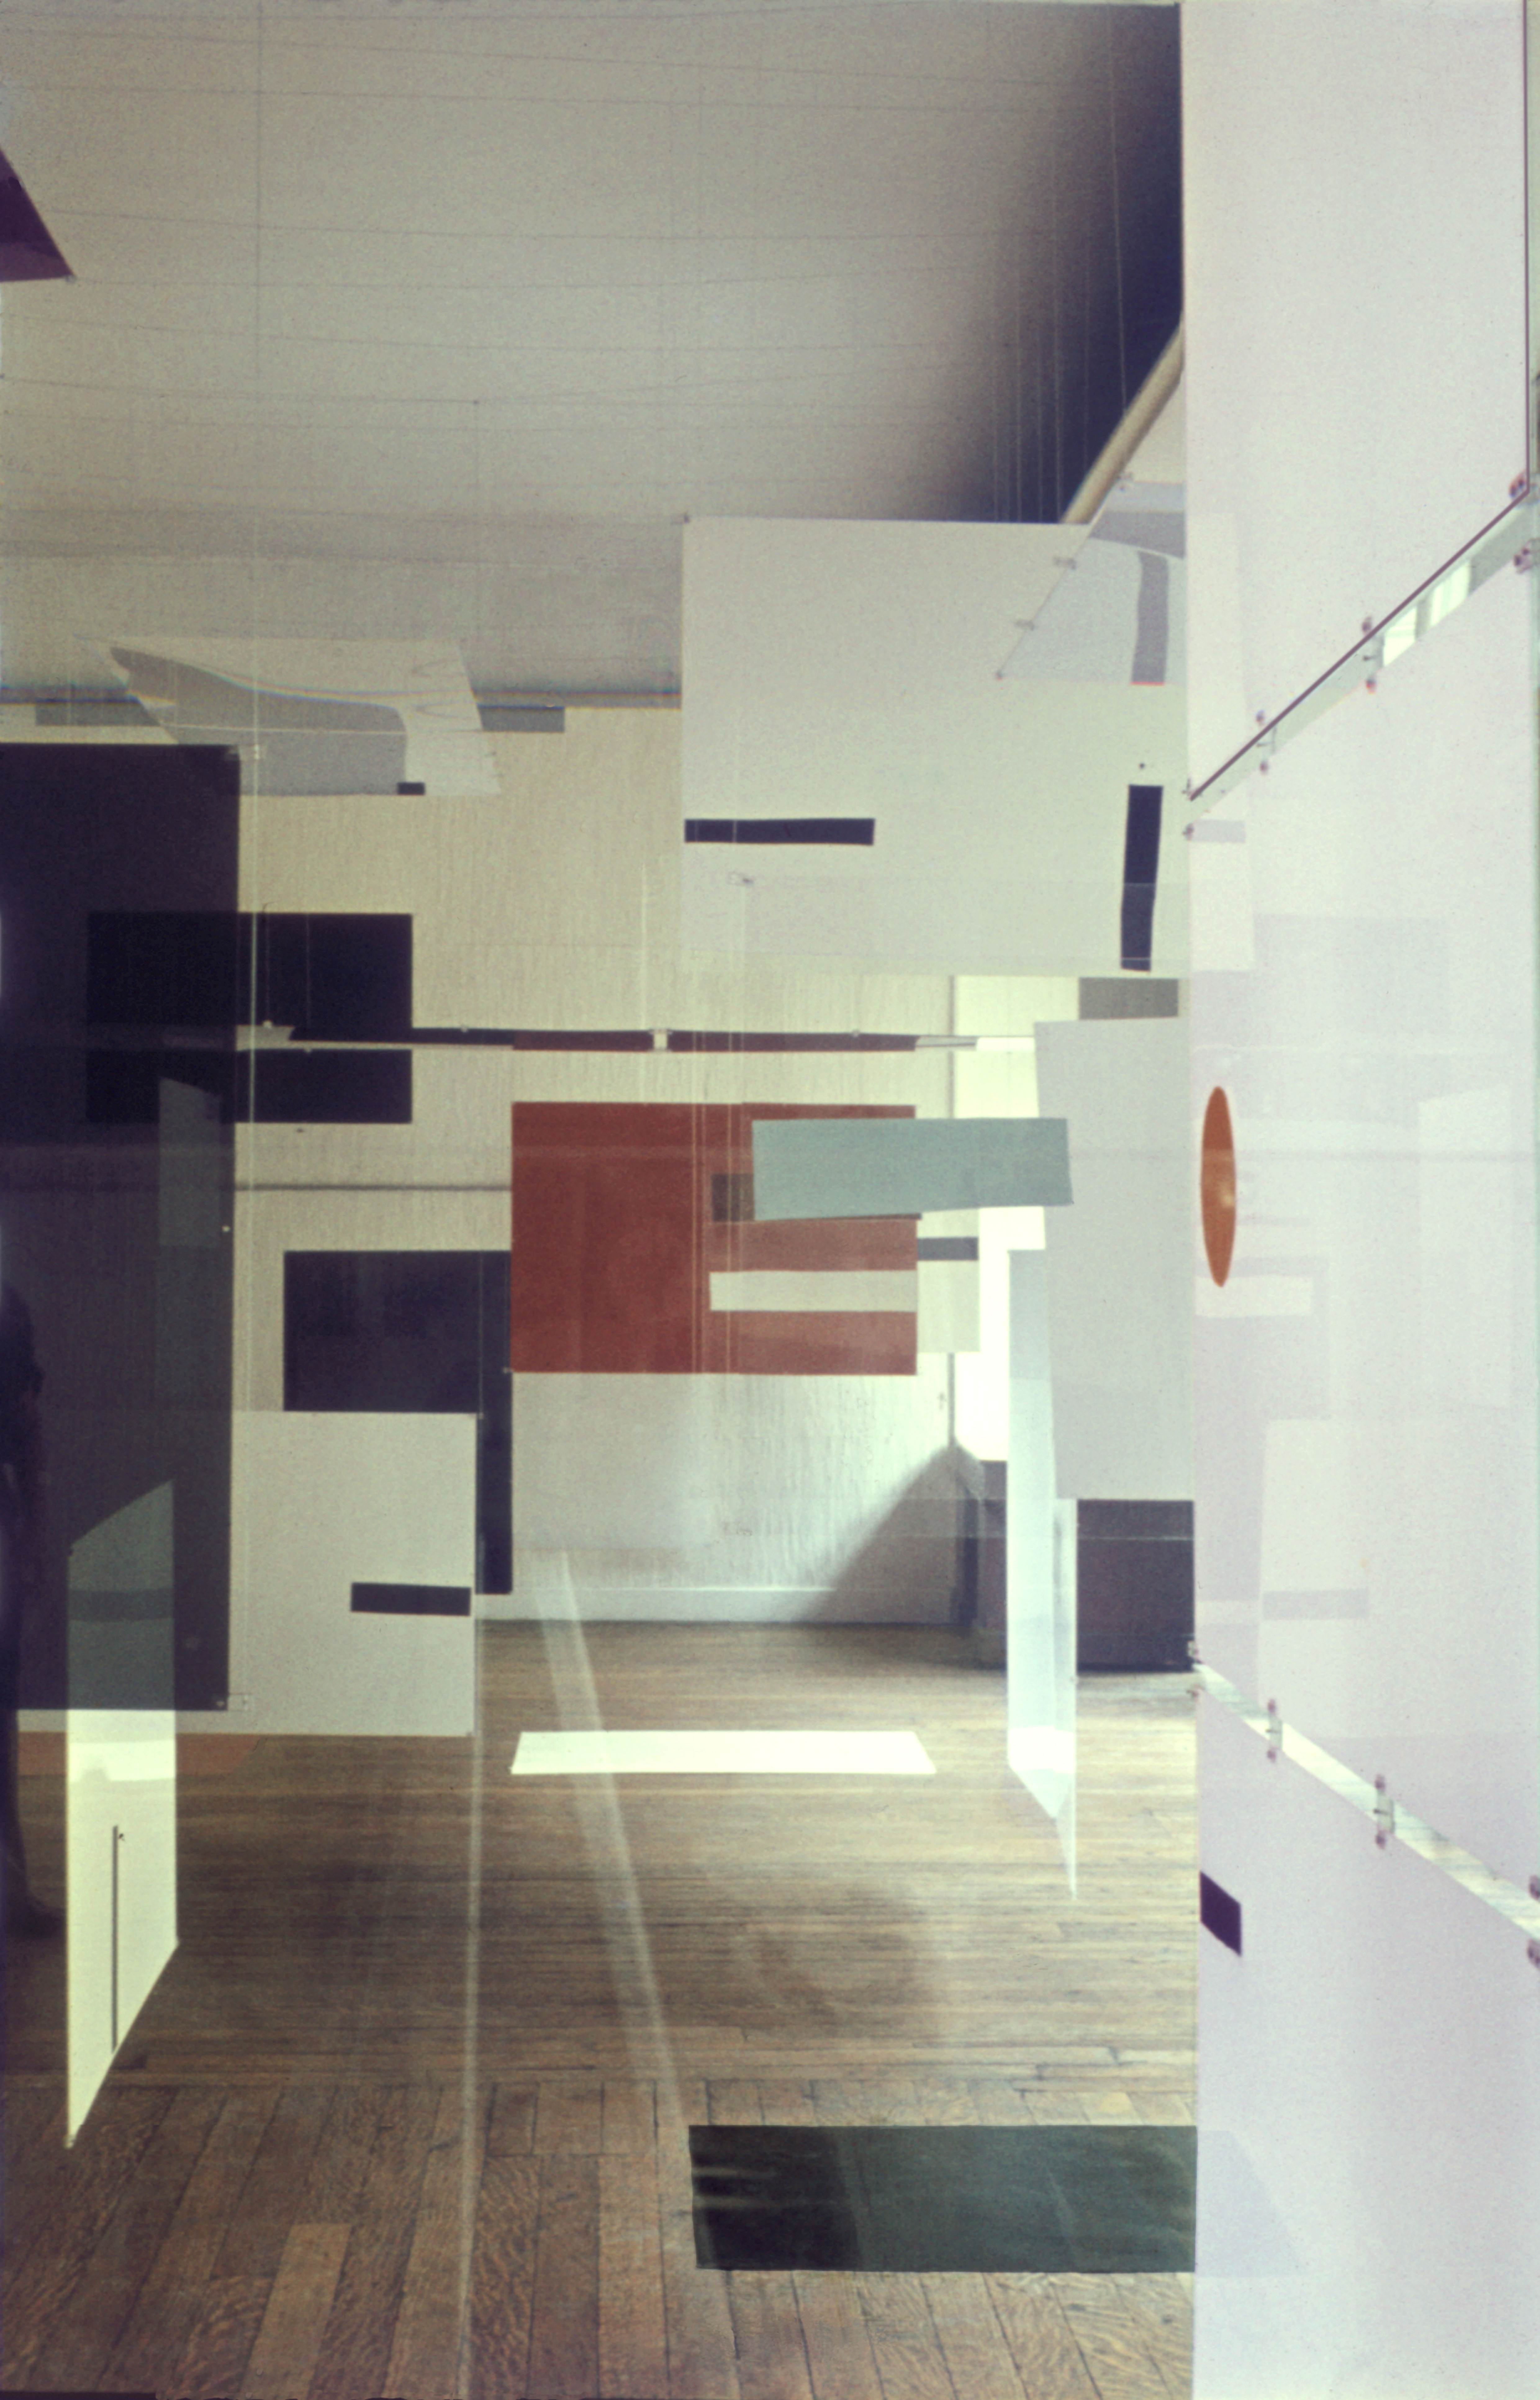 an Exhibit (in association with Victor Pasmore and Lawrence Alloway), record of installation at Institute of Contemporary Arts, London, 1957. Copyright Richard Hamilton 